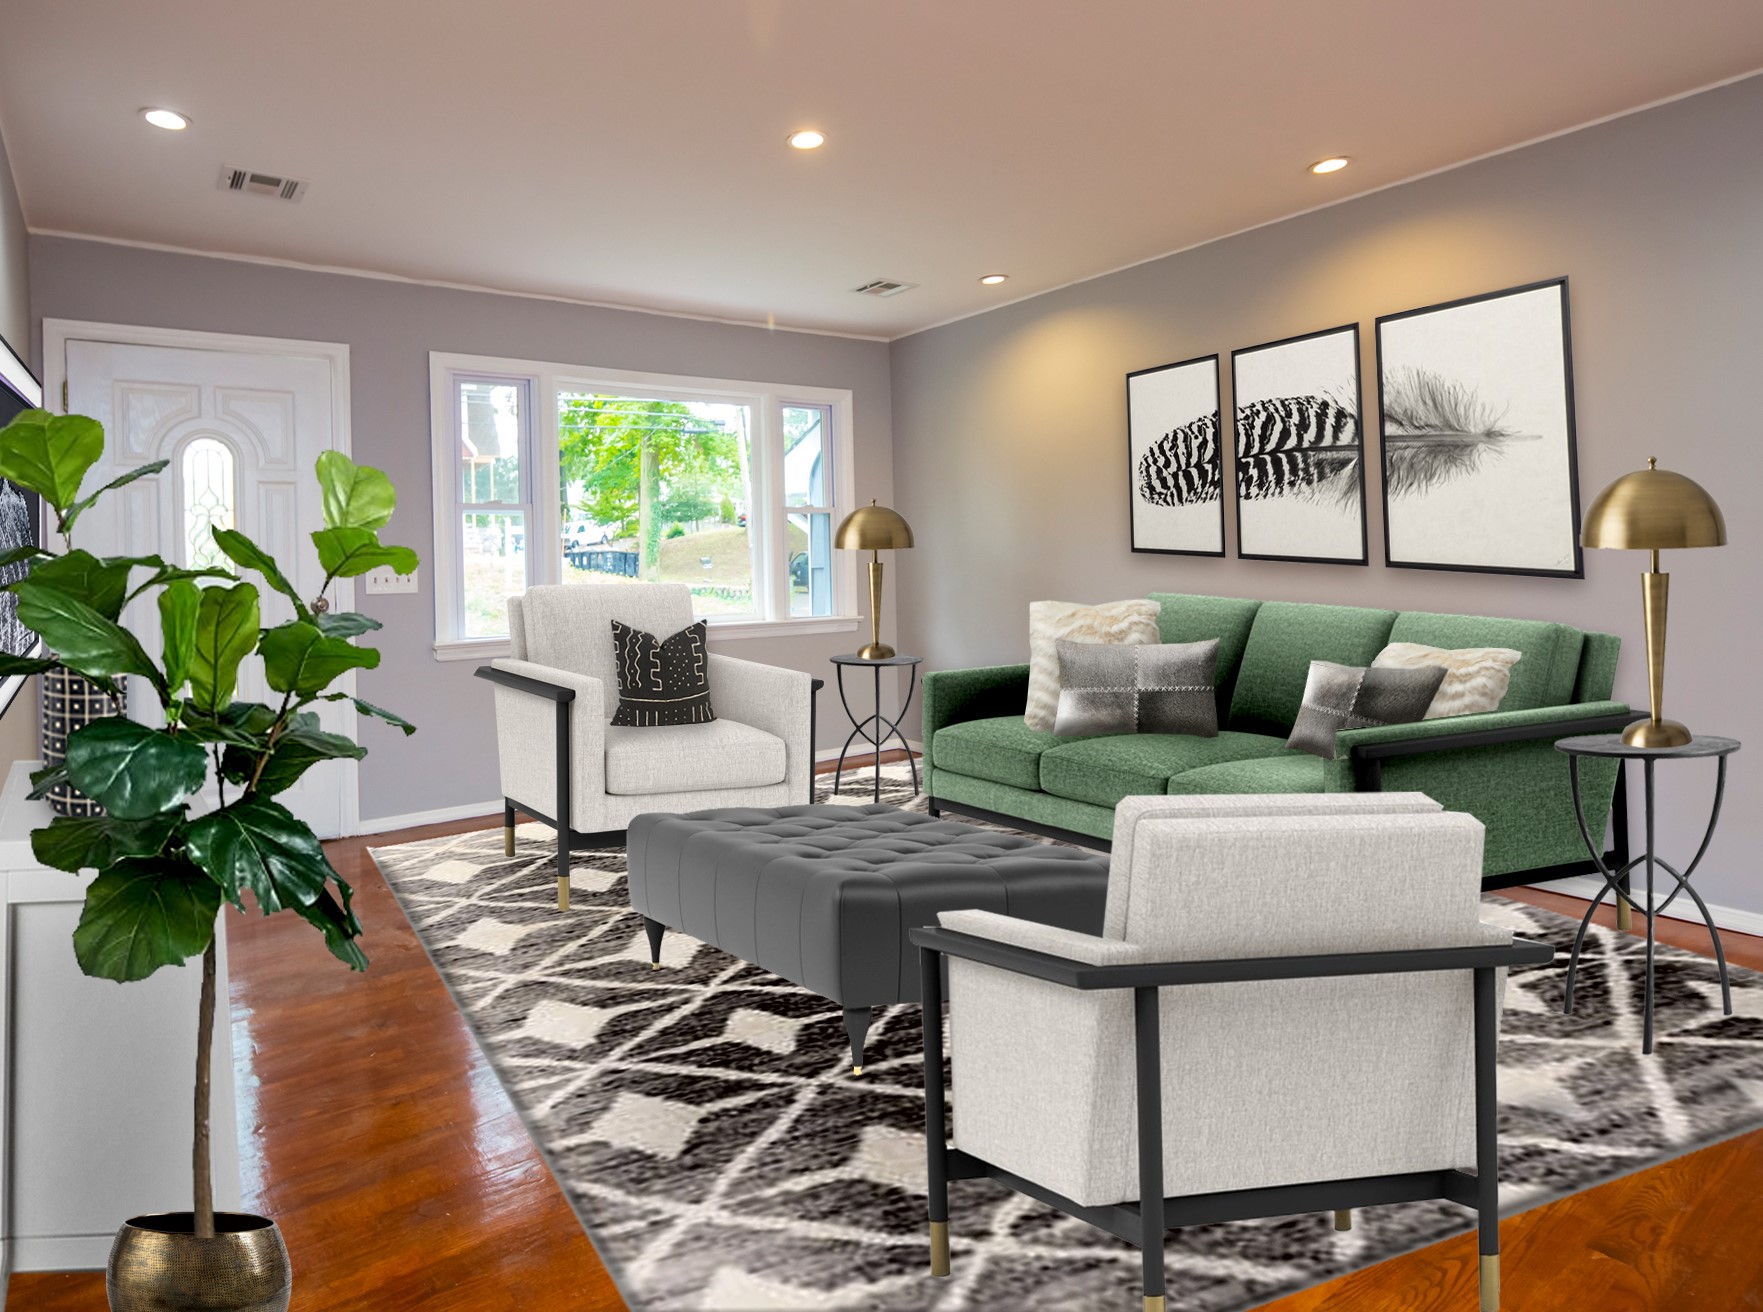 Example of a 3D Render of an Edesign by Northern Lights Home Staging and Design #homestaging #virtualhomestaging #virtualstaging #electronicstaging #edesign #onlinedesign #realestatemarketing